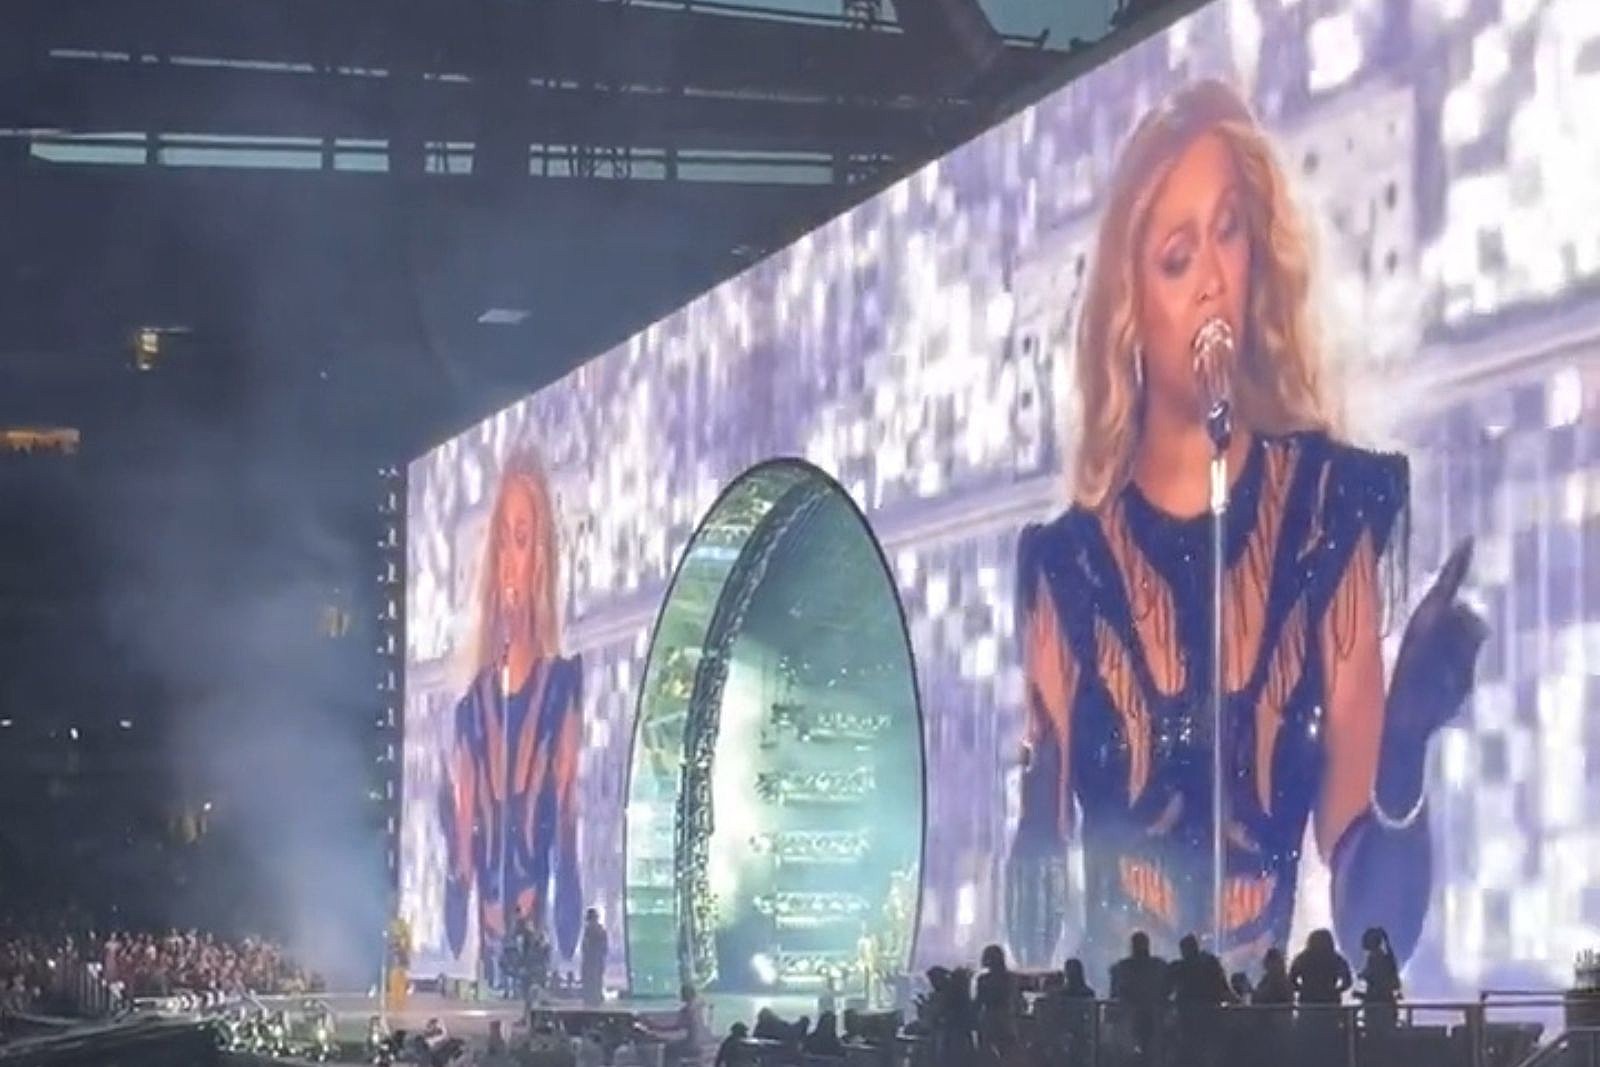 FAQ Everything You Need to Know About Beyoncé at MetLife Stadium